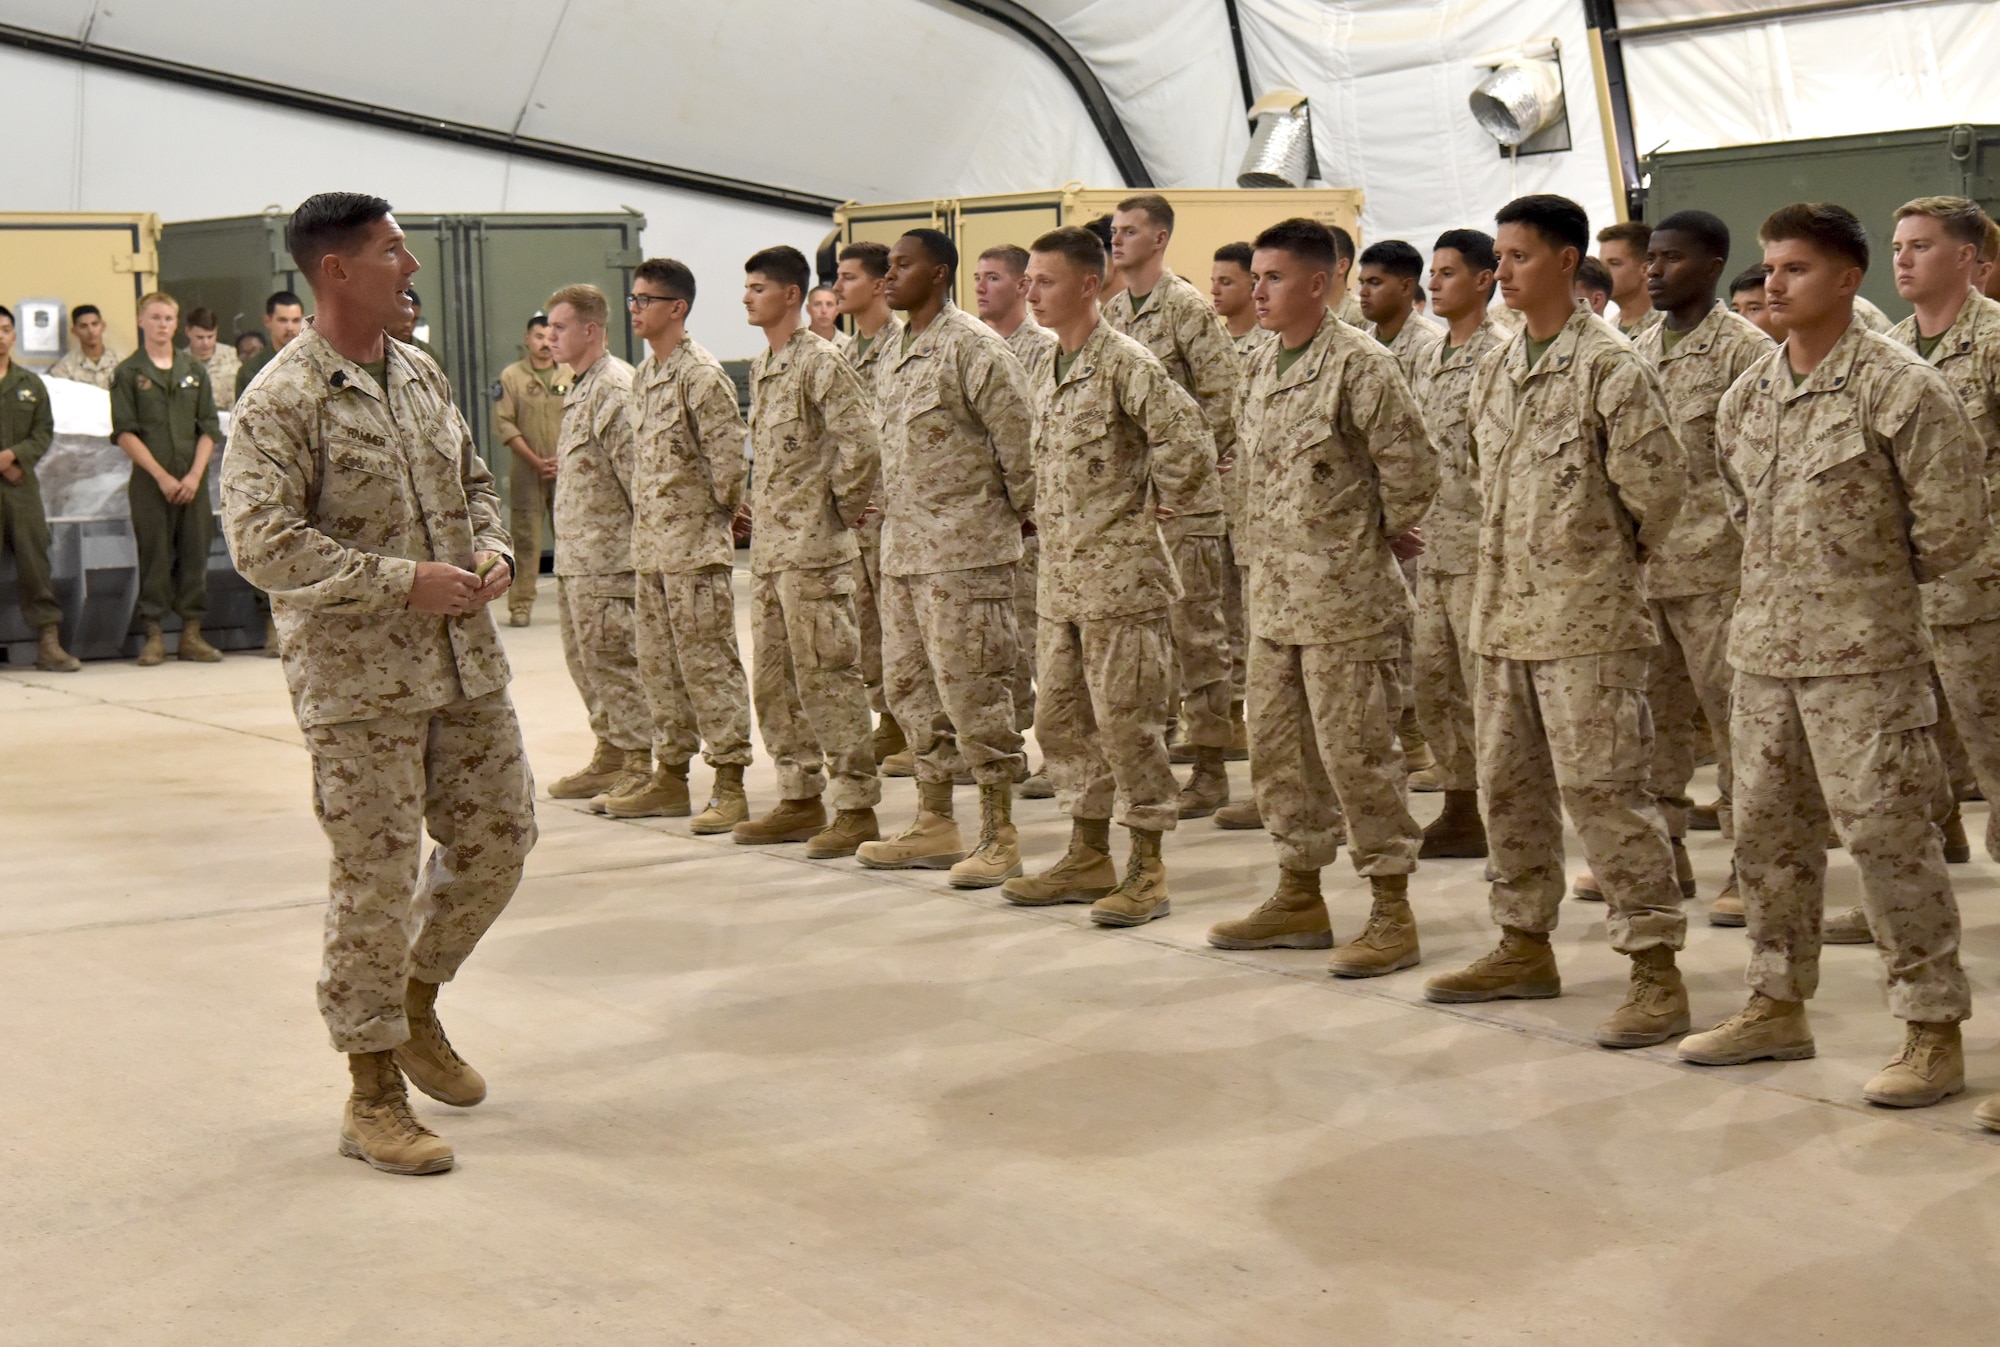 Sixty U.S. Marines with Mari.ne Attack Squadron 214 complete their Corporals Course at Prince Sultan Air Base, Kingdom of Saudi Arabia